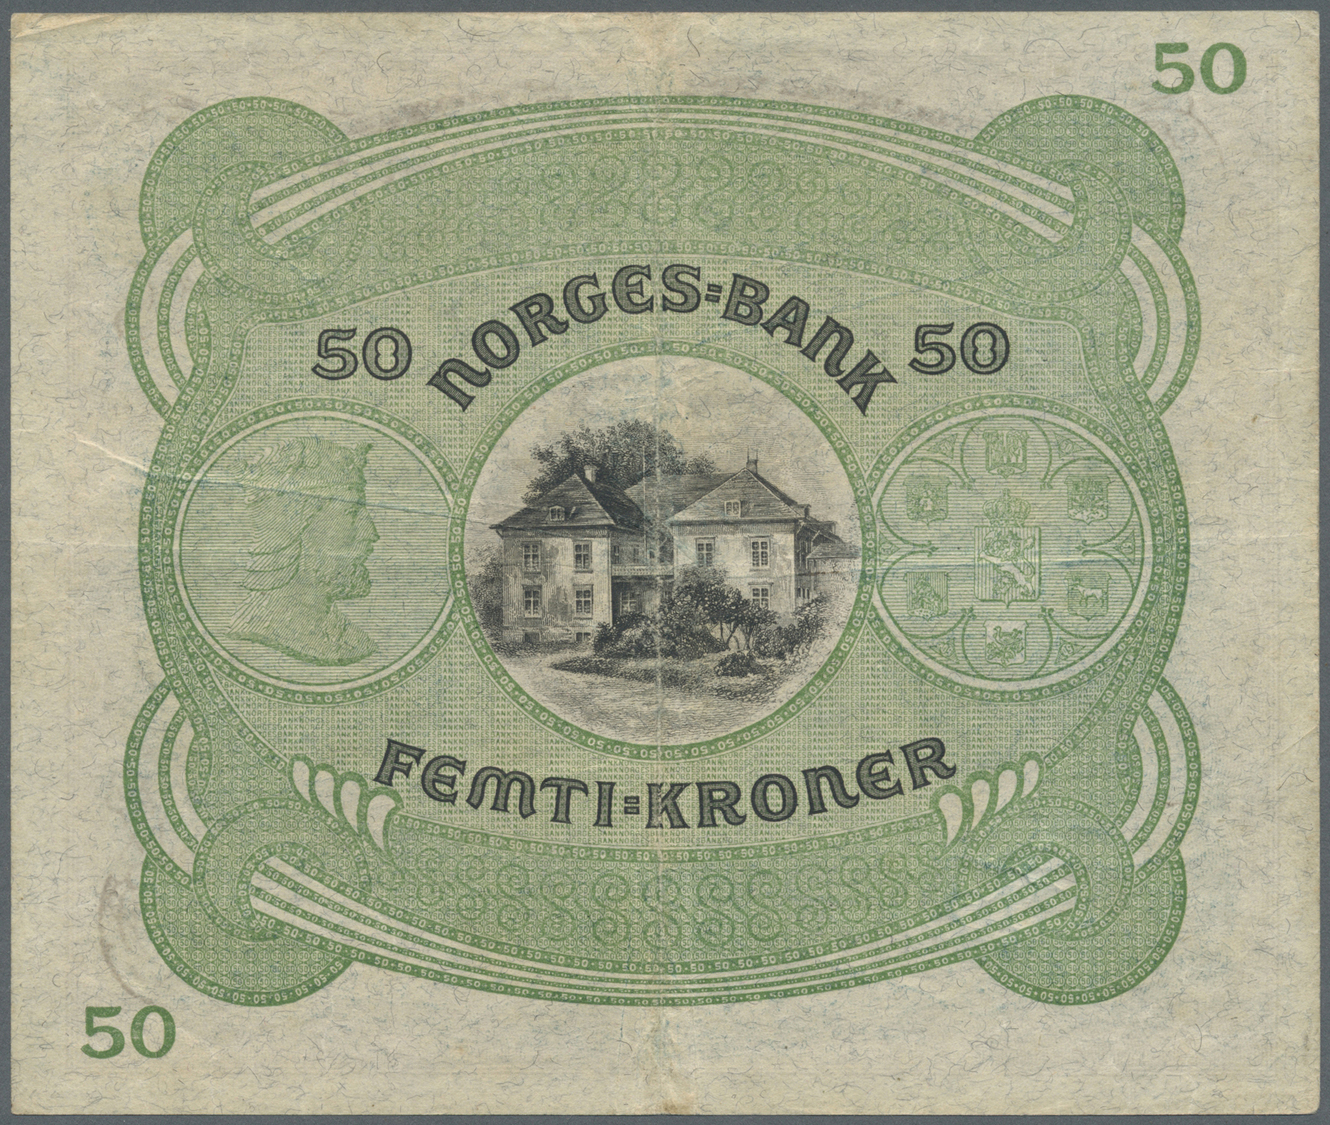 01916 Norway / Norwegen: 50 Kroner 1943 P. 9d, Used With Stronger Center Fold, Vertical Folds, No Holes Or Tears, Not Wa - Norway